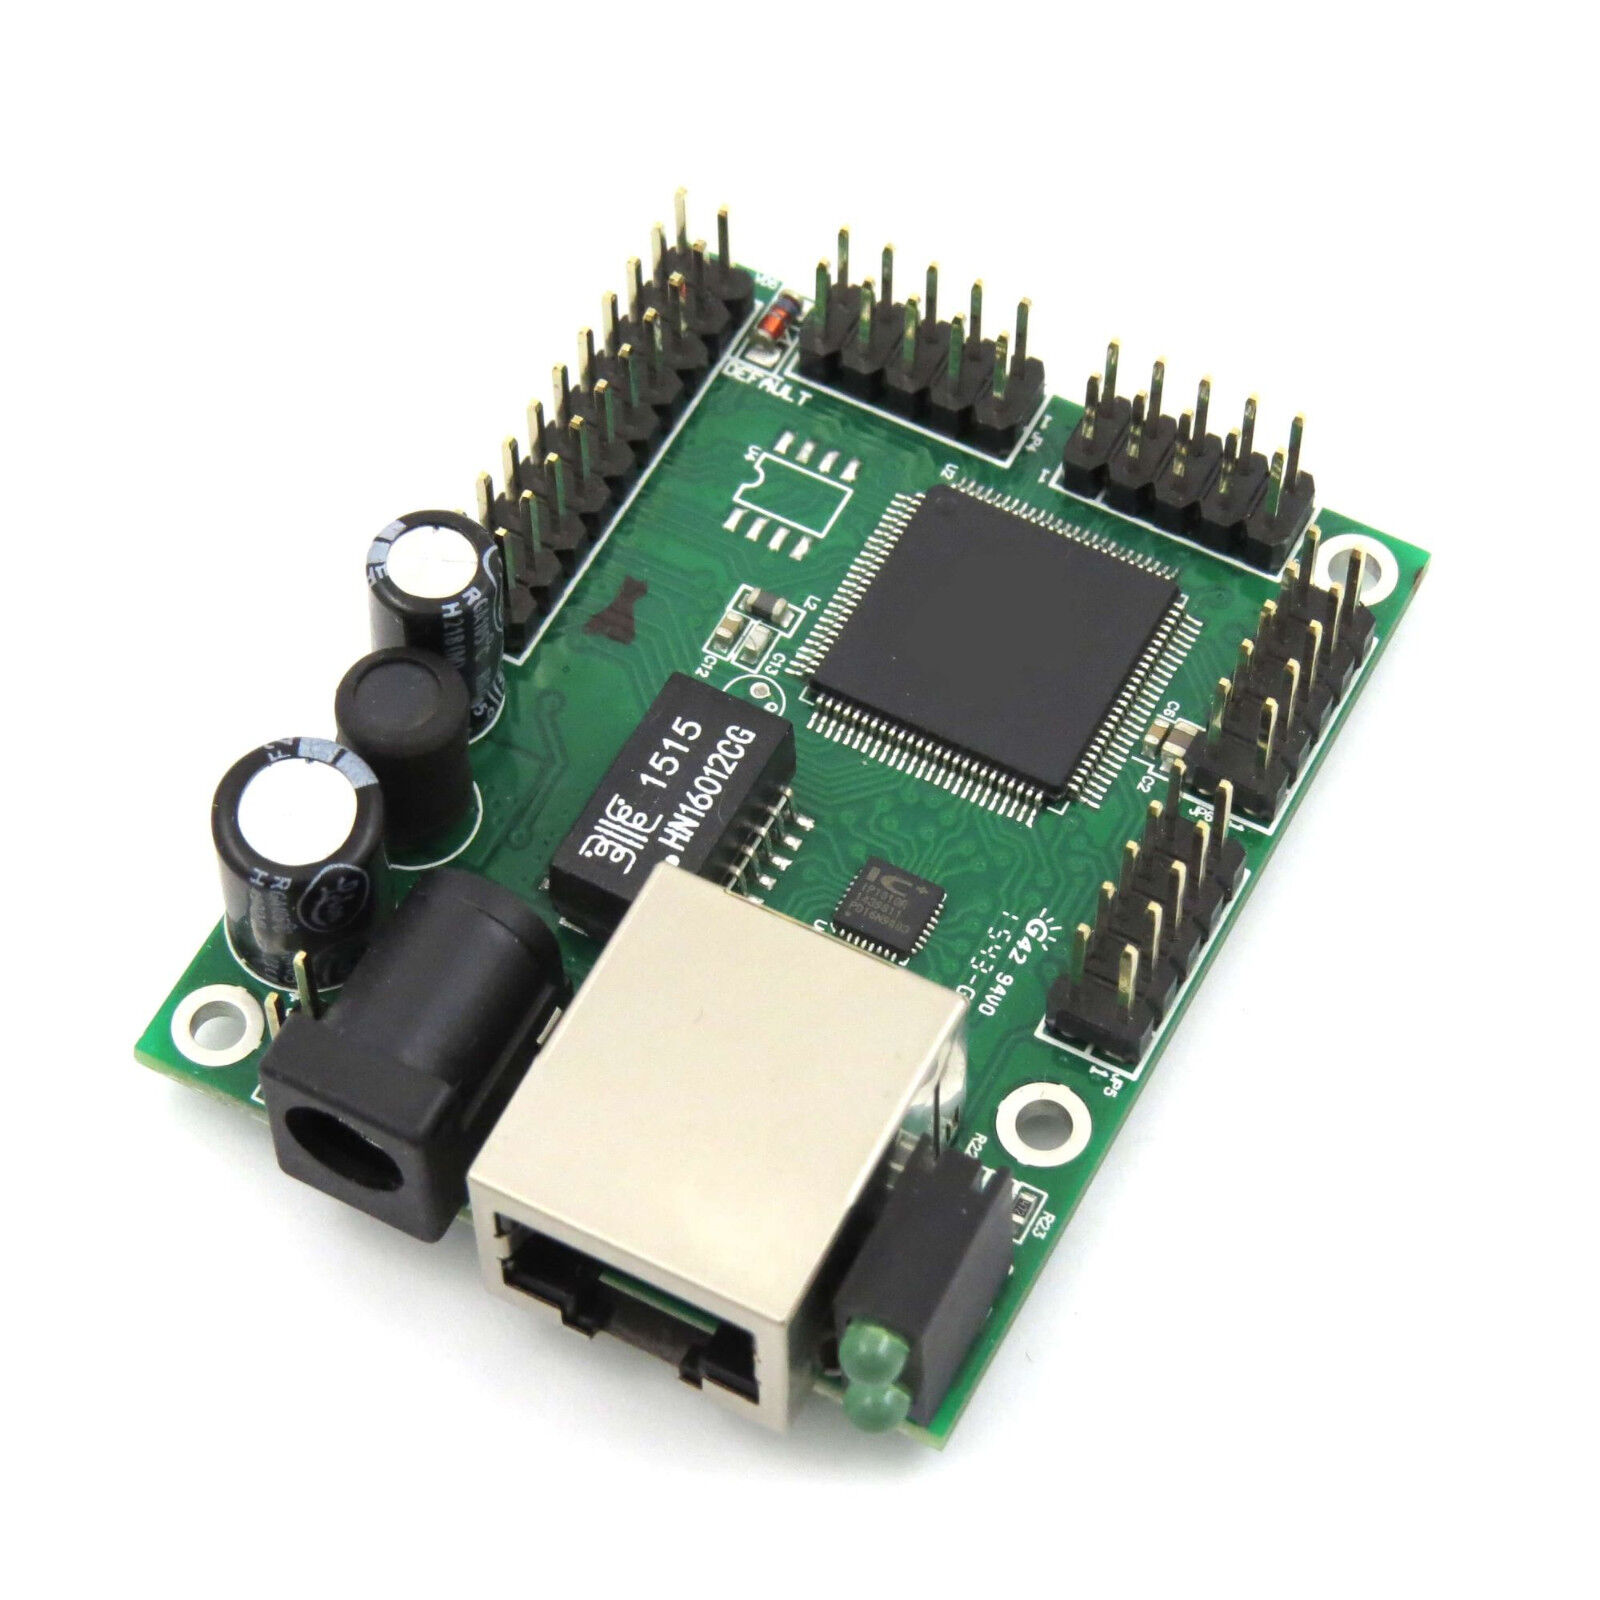 Ethernet controller with 24 digital and analog I/O